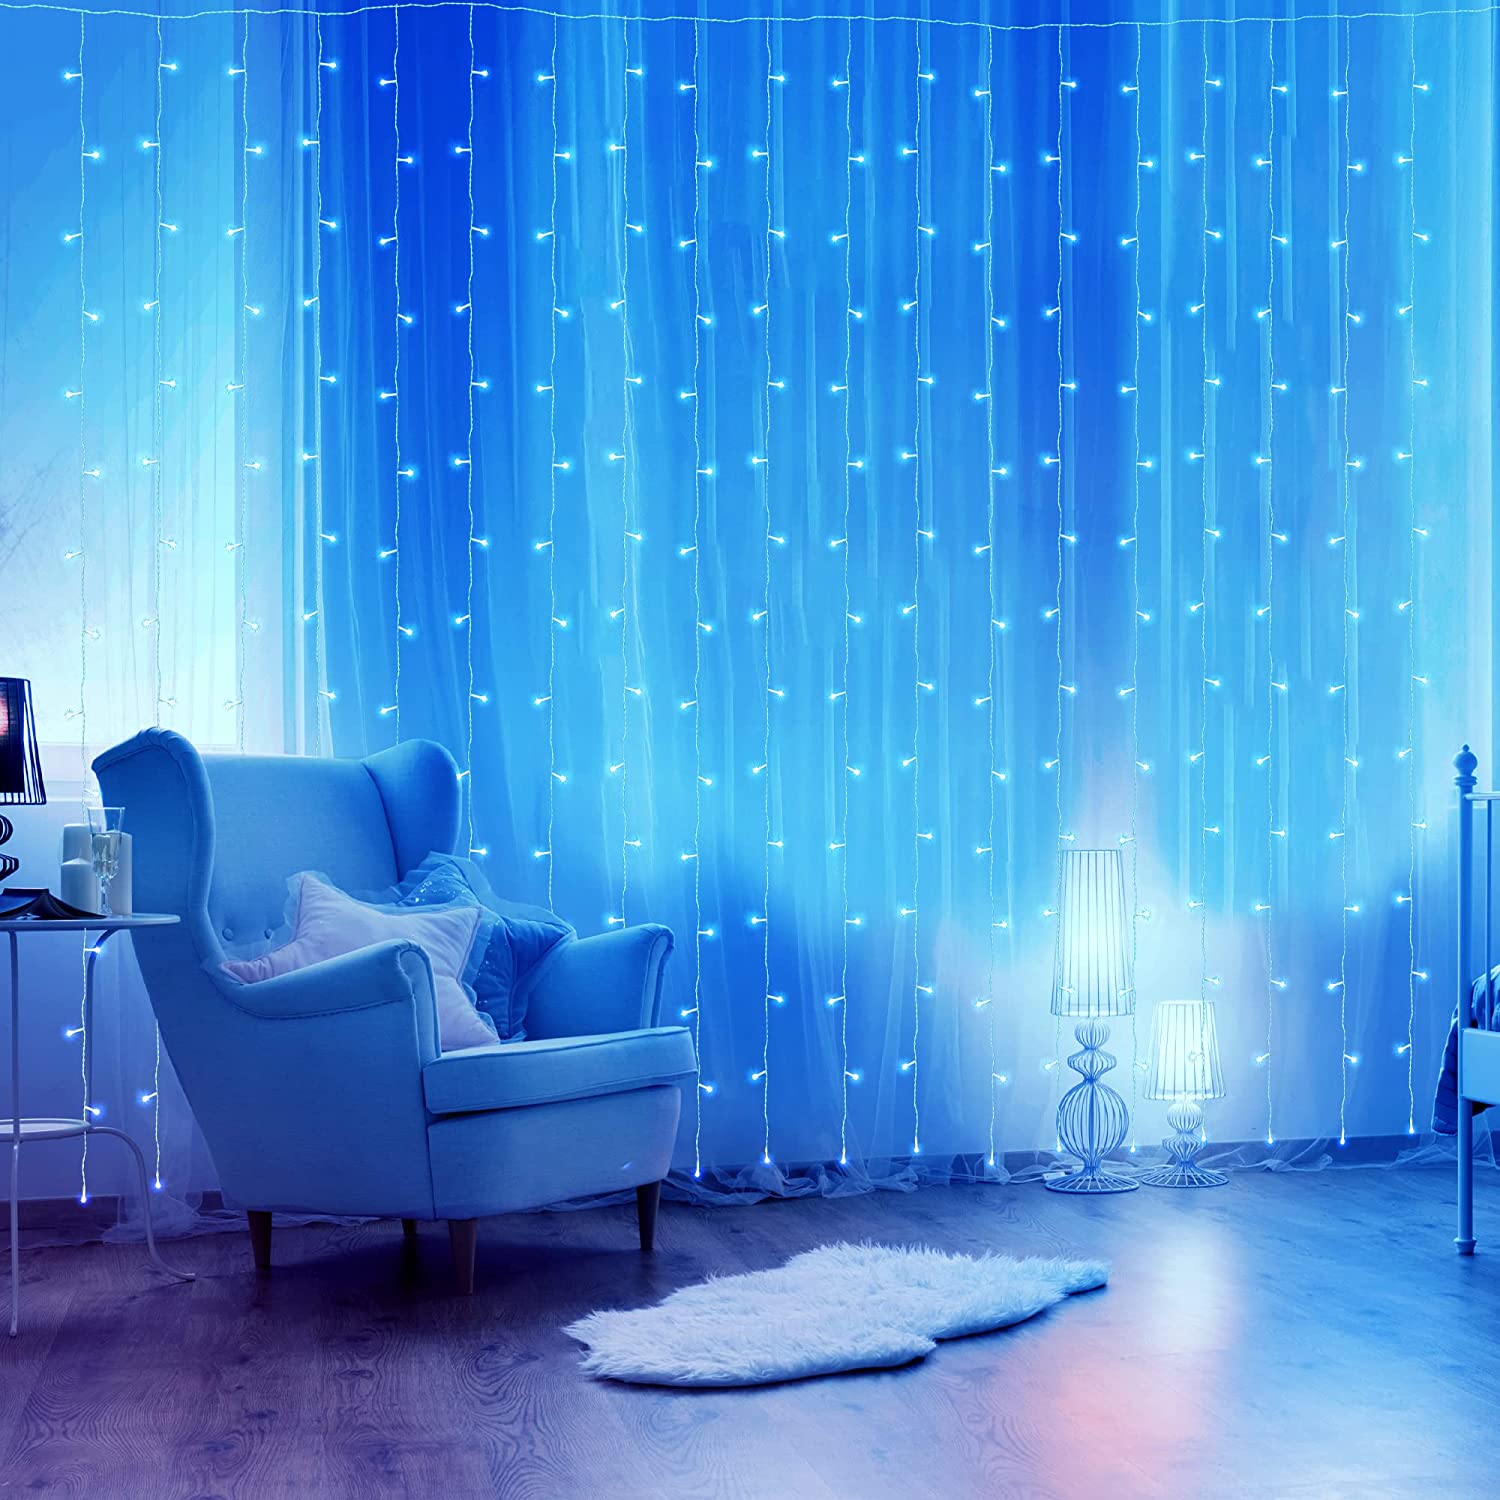 NETTA Curtain Fairy Lights - 3M x 3M, Waterproof LED with Timer, 8 Modes - Cool White